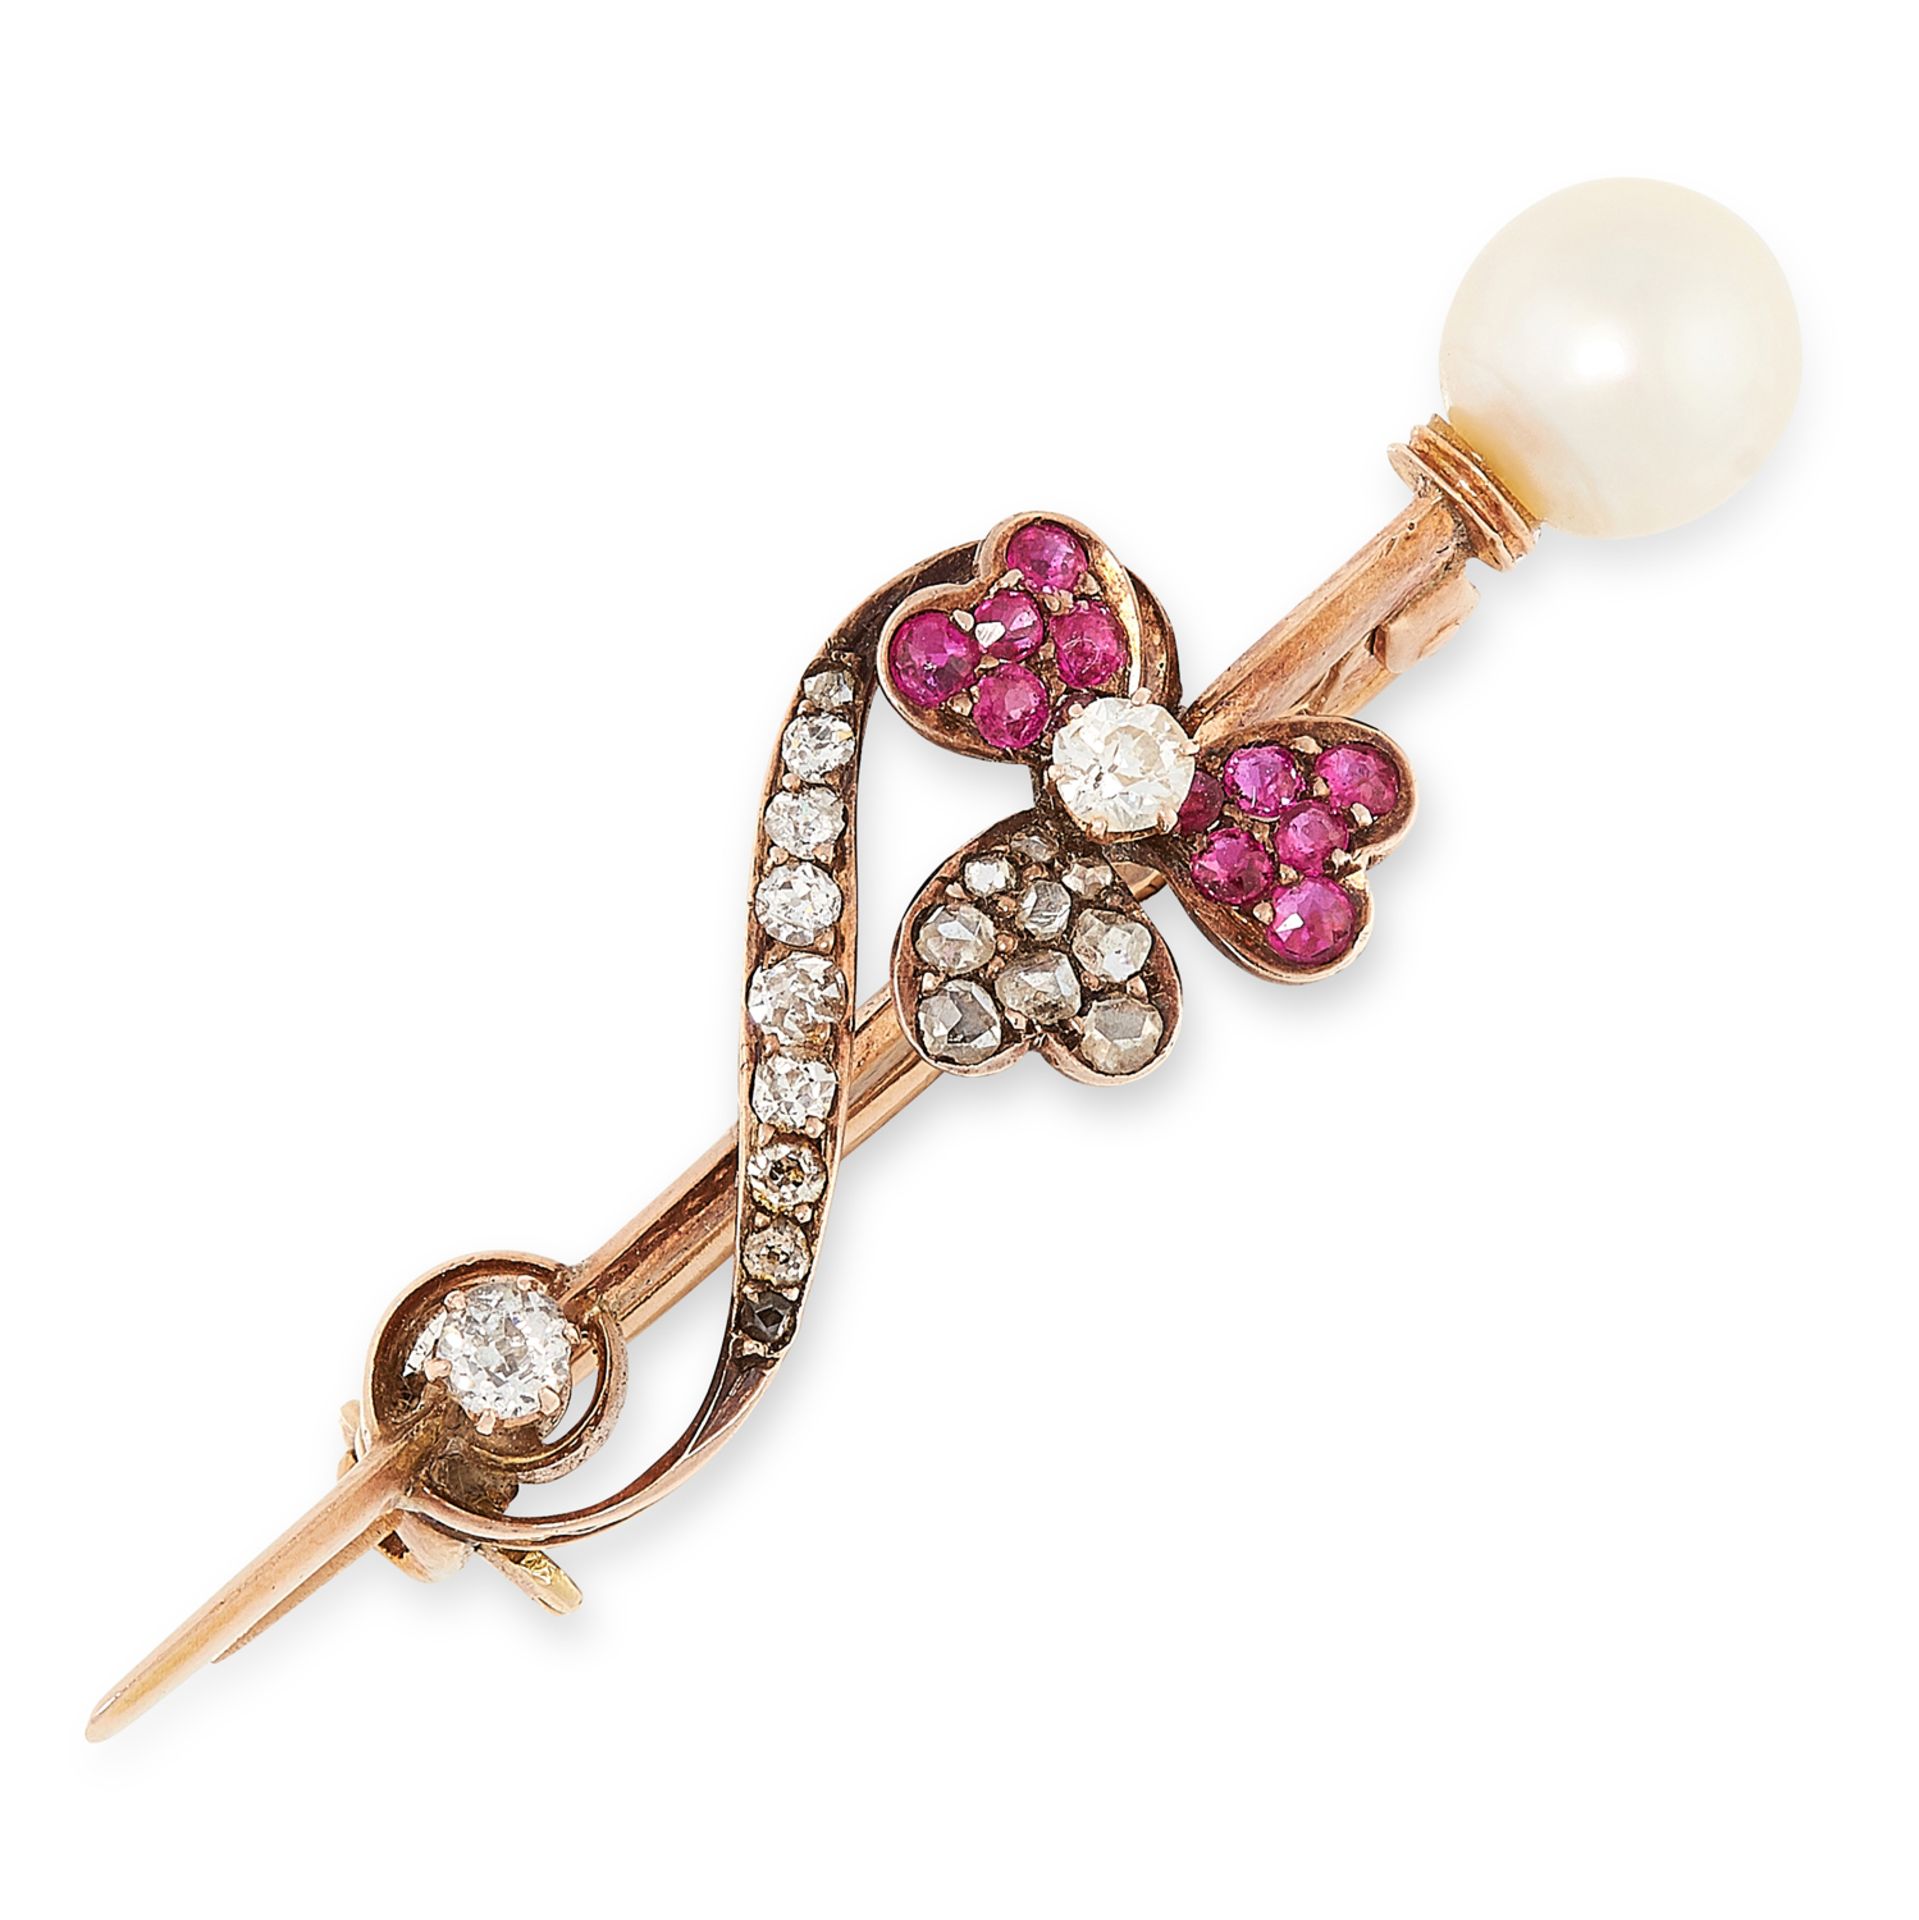 AN ANTIQUE PEARL, RUBY AND DIAMOND BROOCH in yellow gold, depicting a clover in scrolling design,